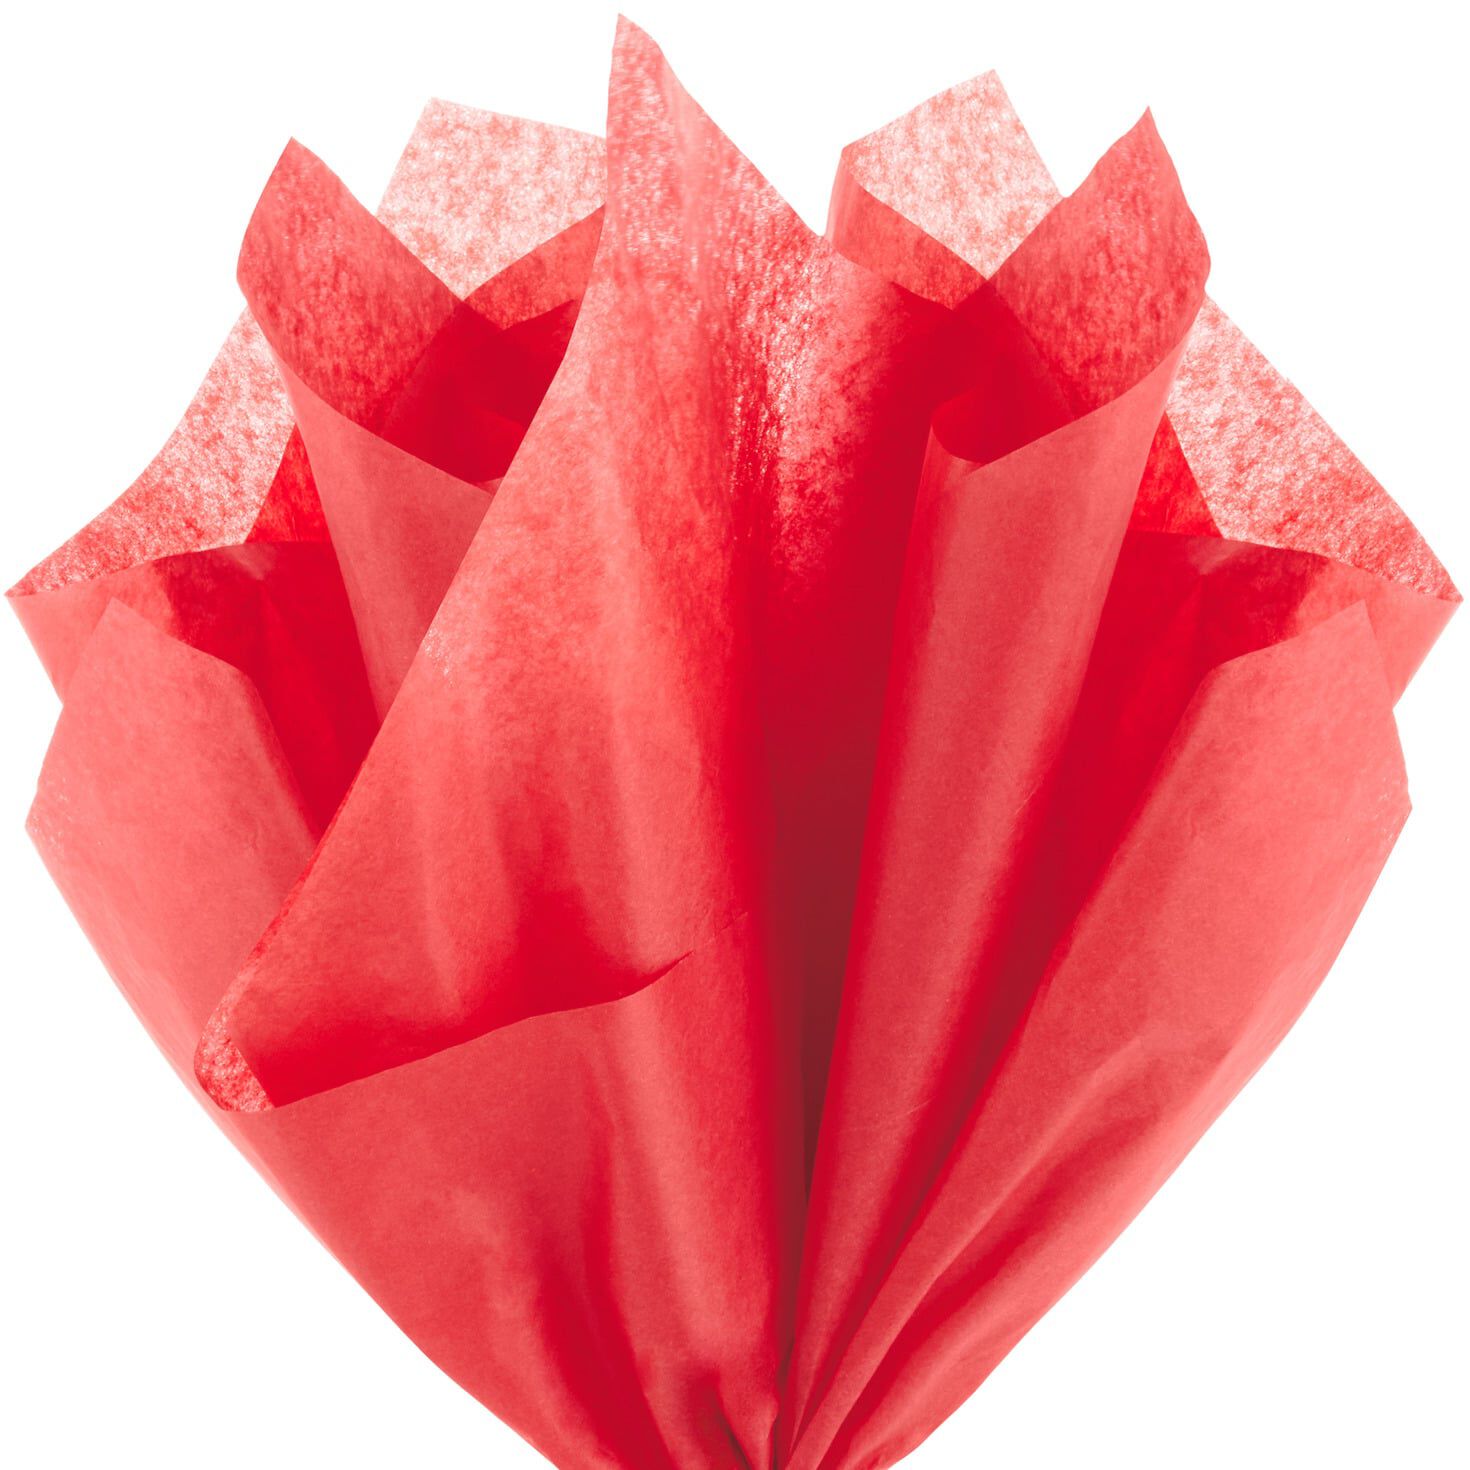 Top quality Scarlet Tissue paper 48 Sheets 50 x 75cm 